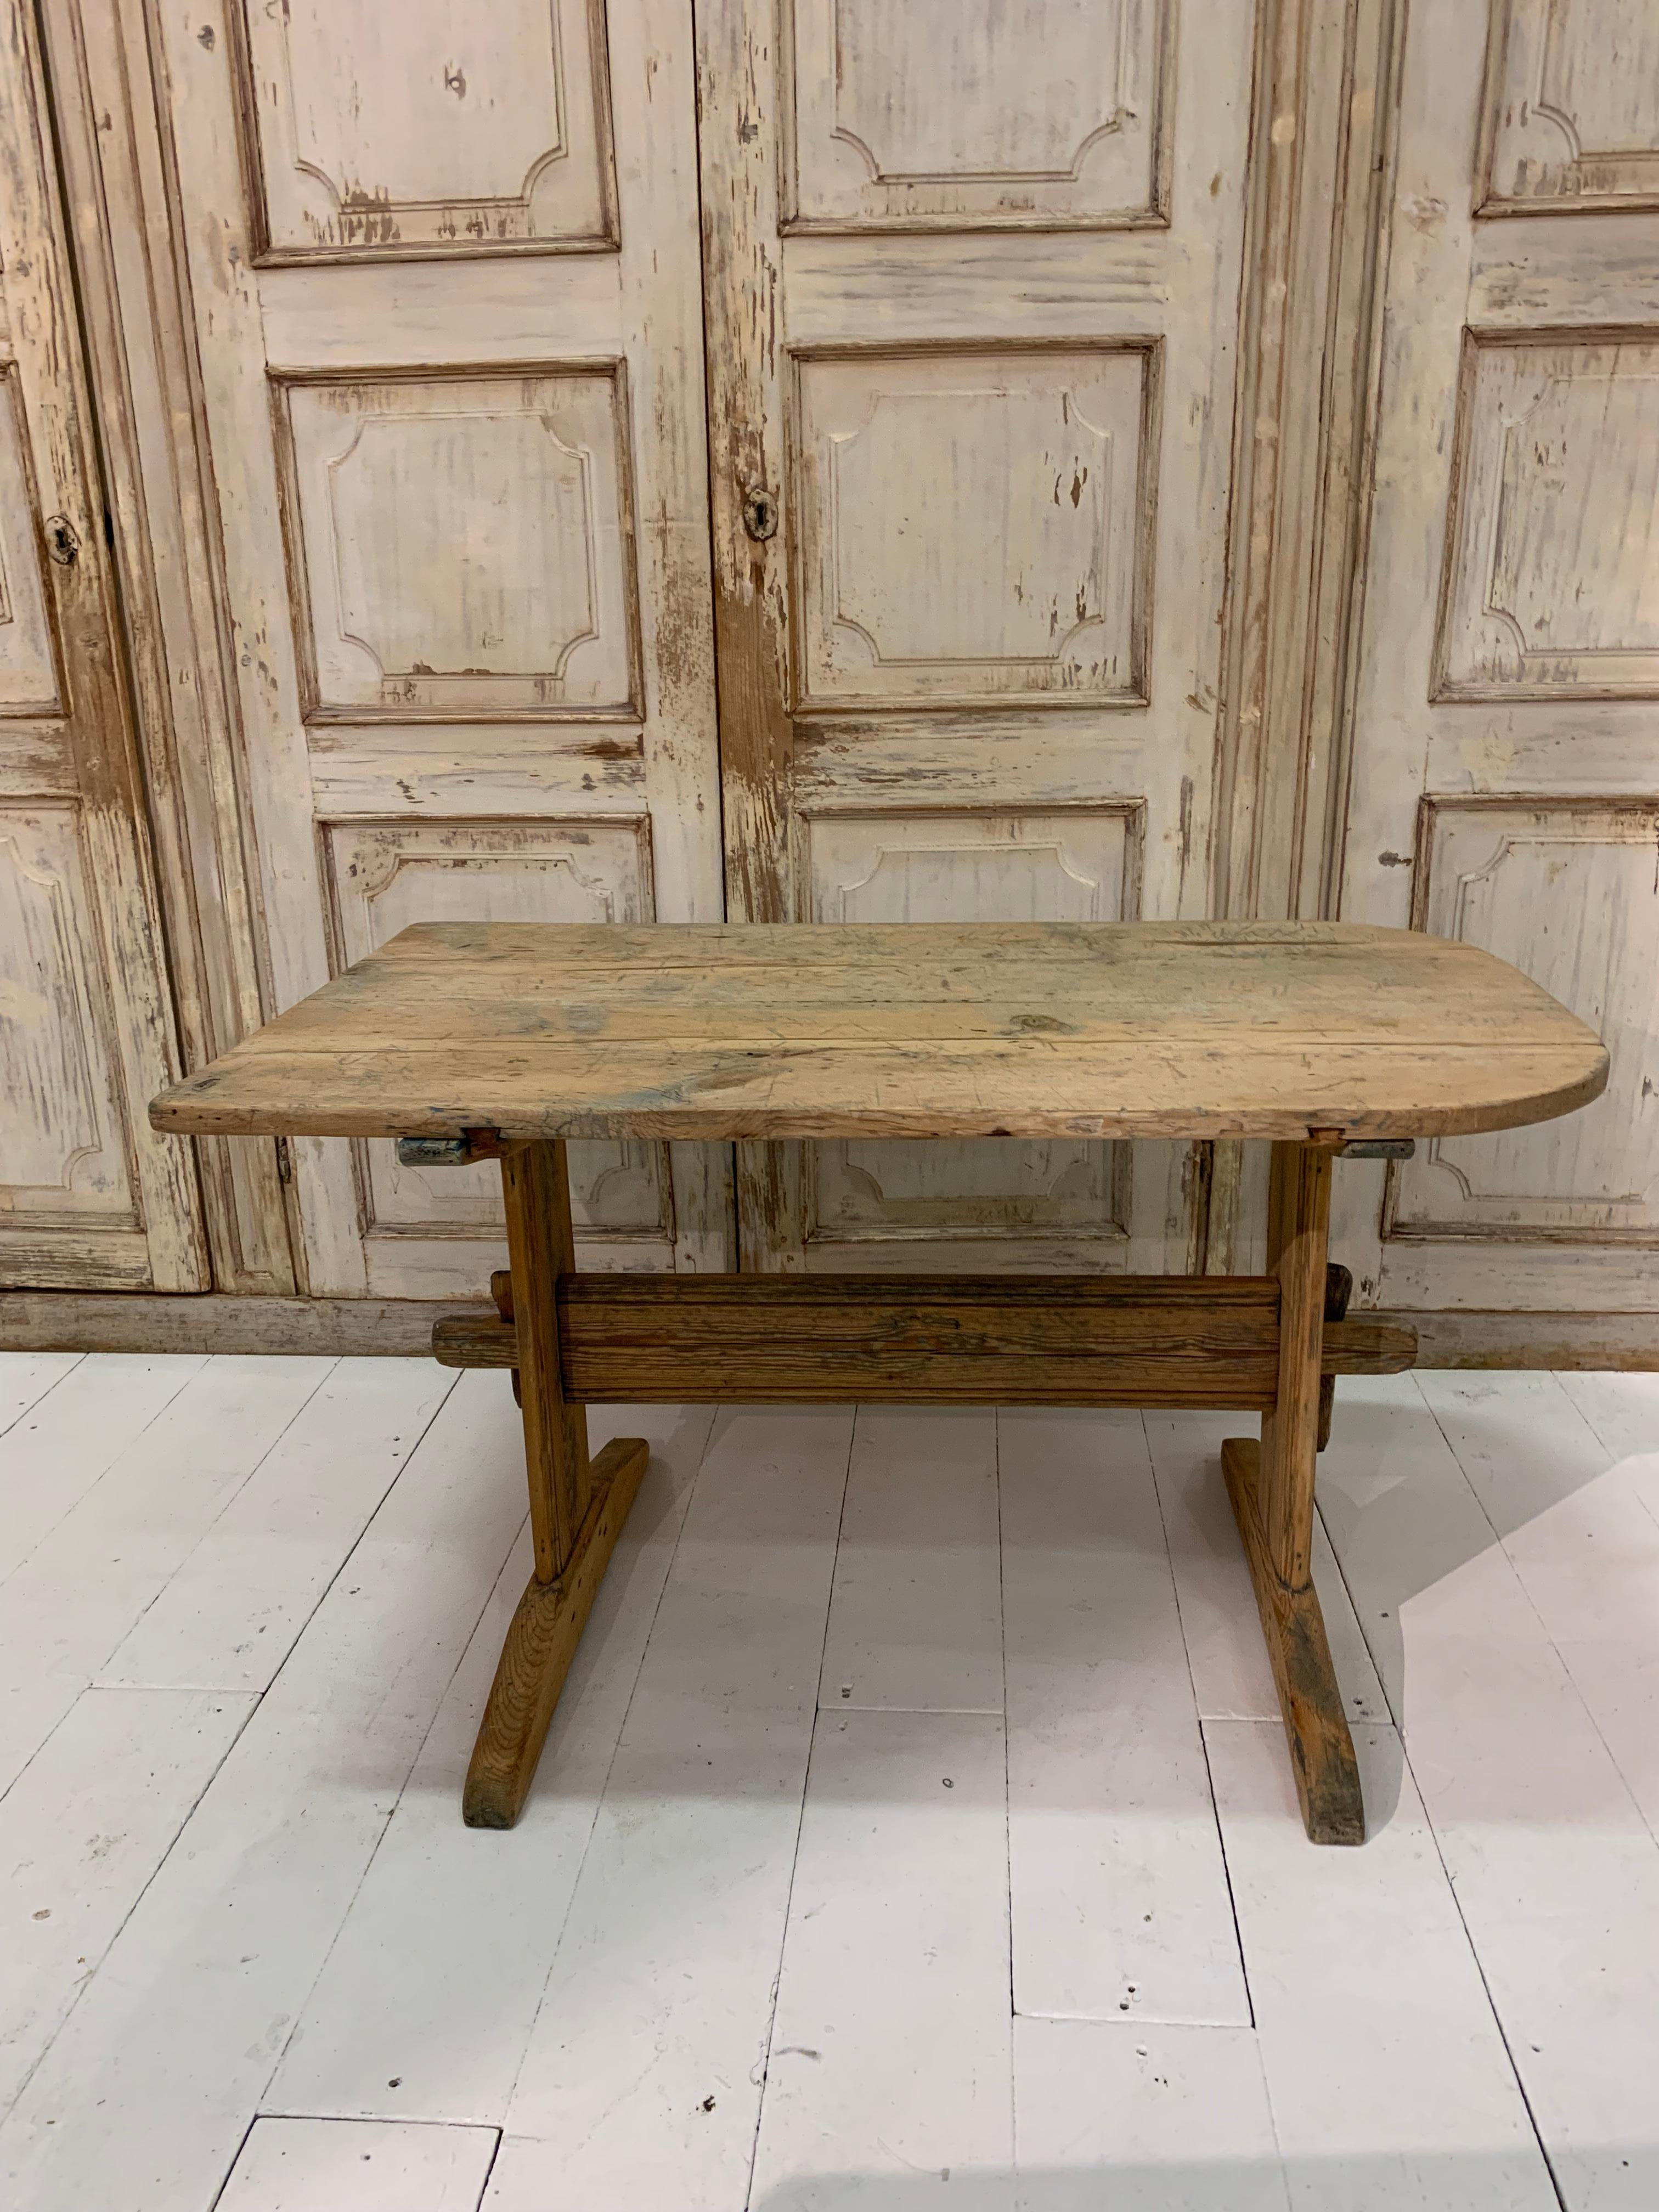 Swedish Country Pine Refectory Table with One Curved End, circa 18th Century For Sale 10